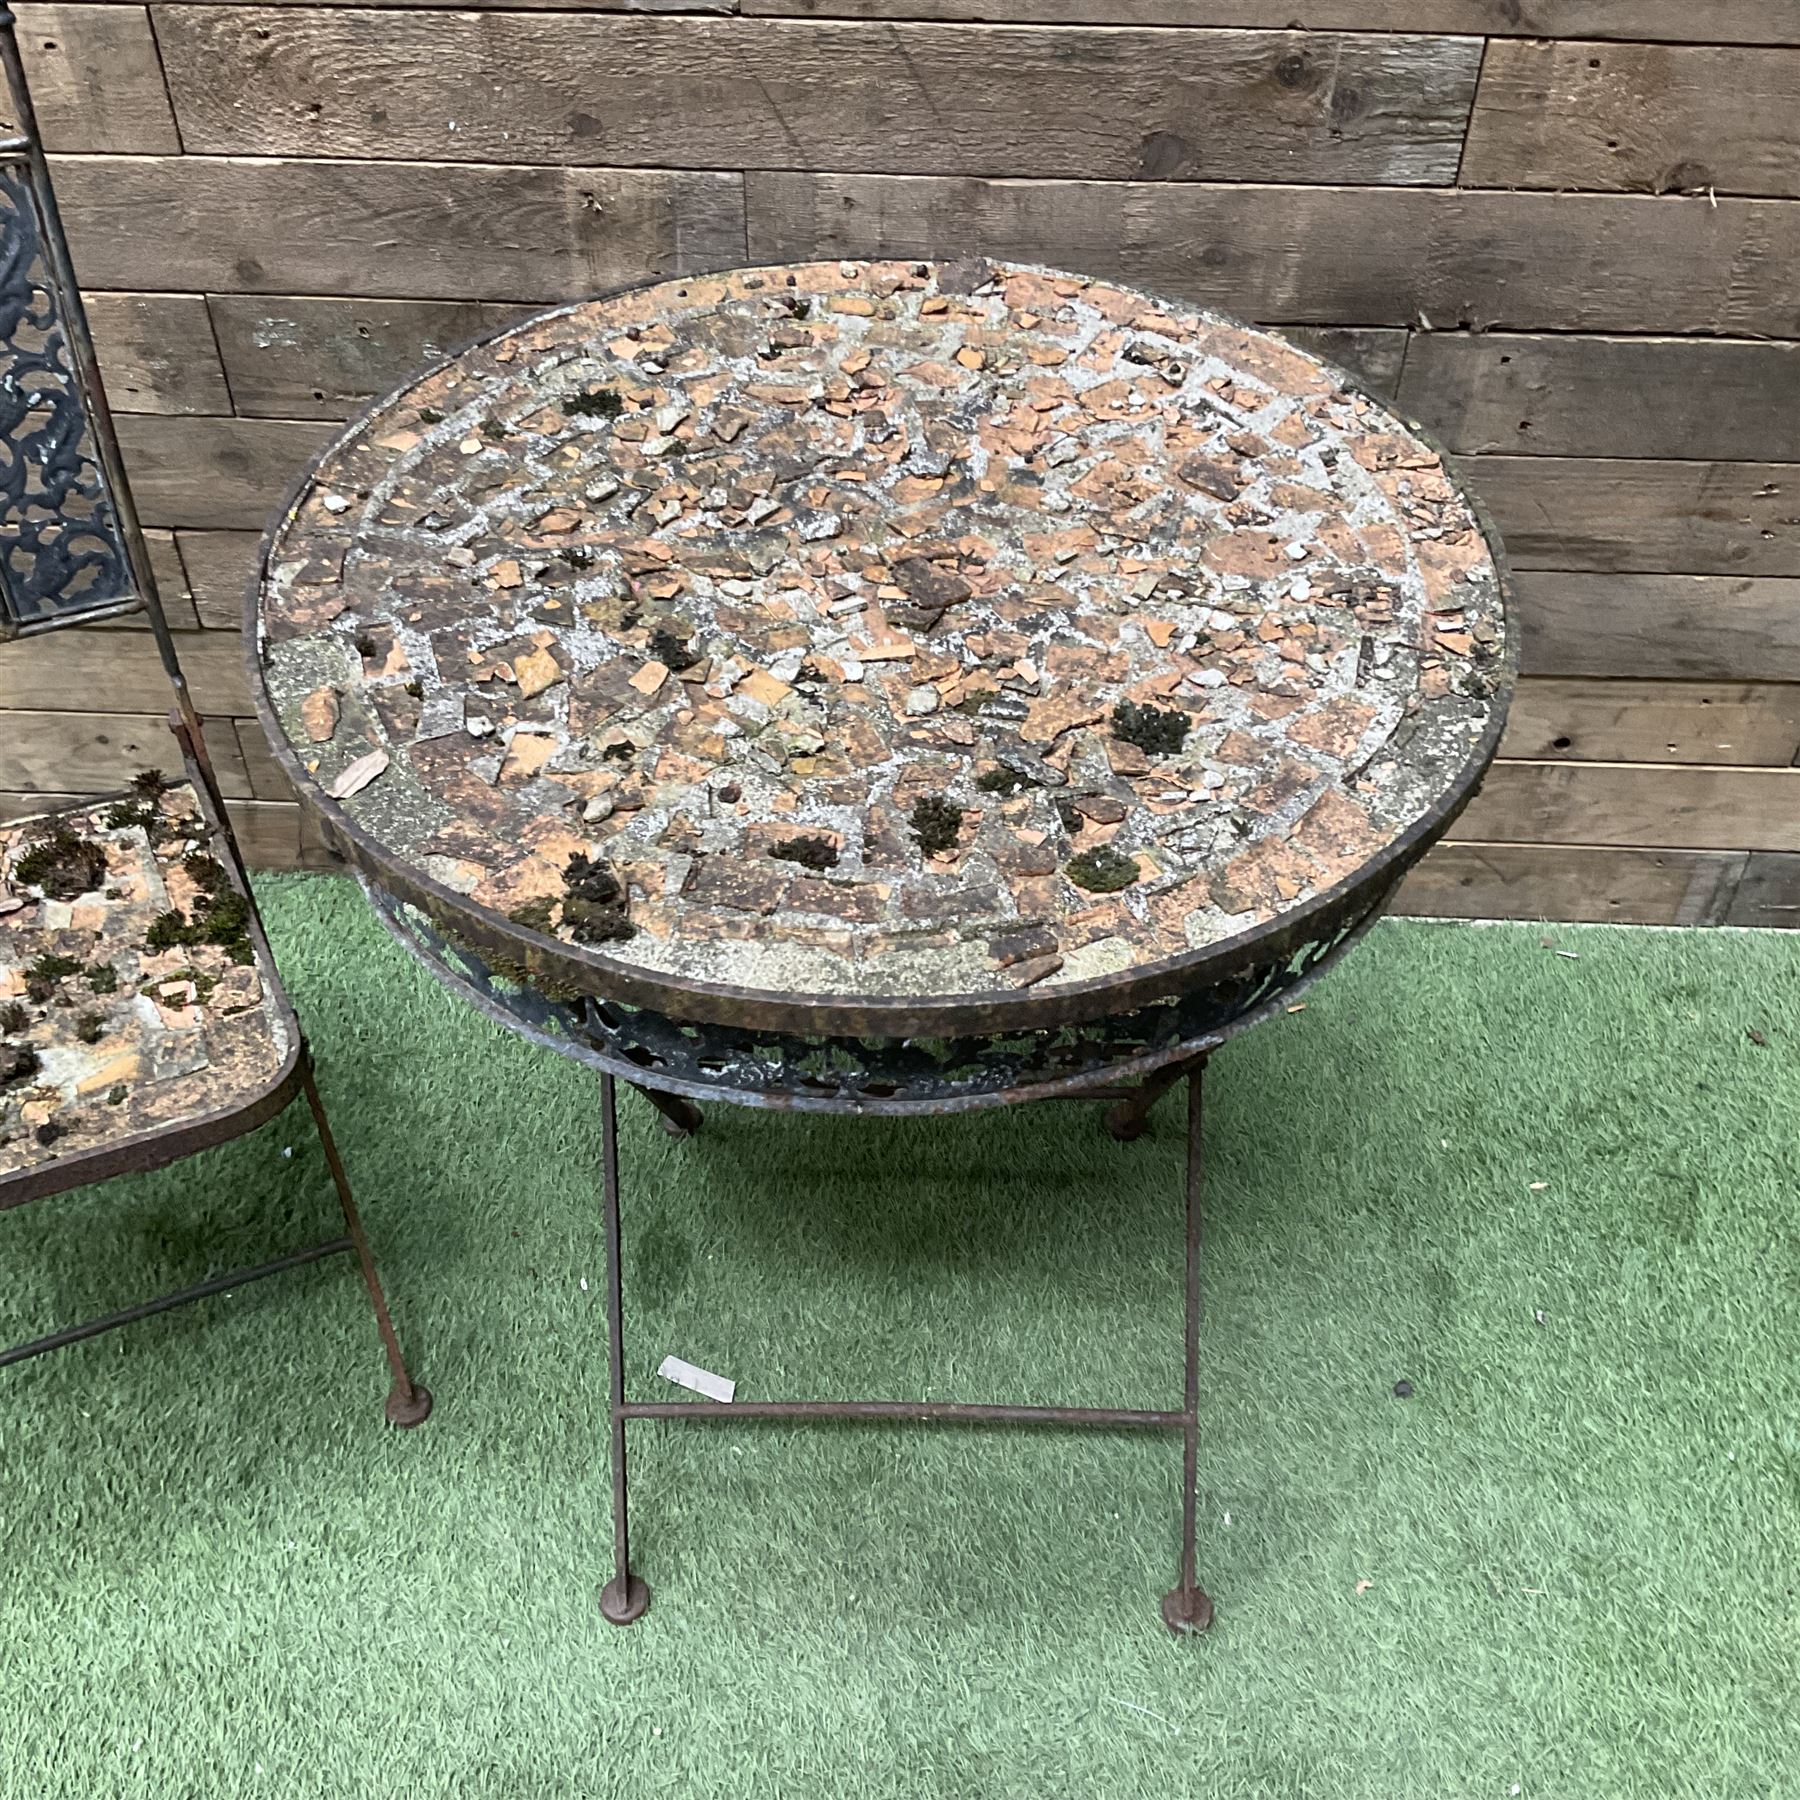 Circular metal garden table with tile top and matching chair - Image 2 of 3